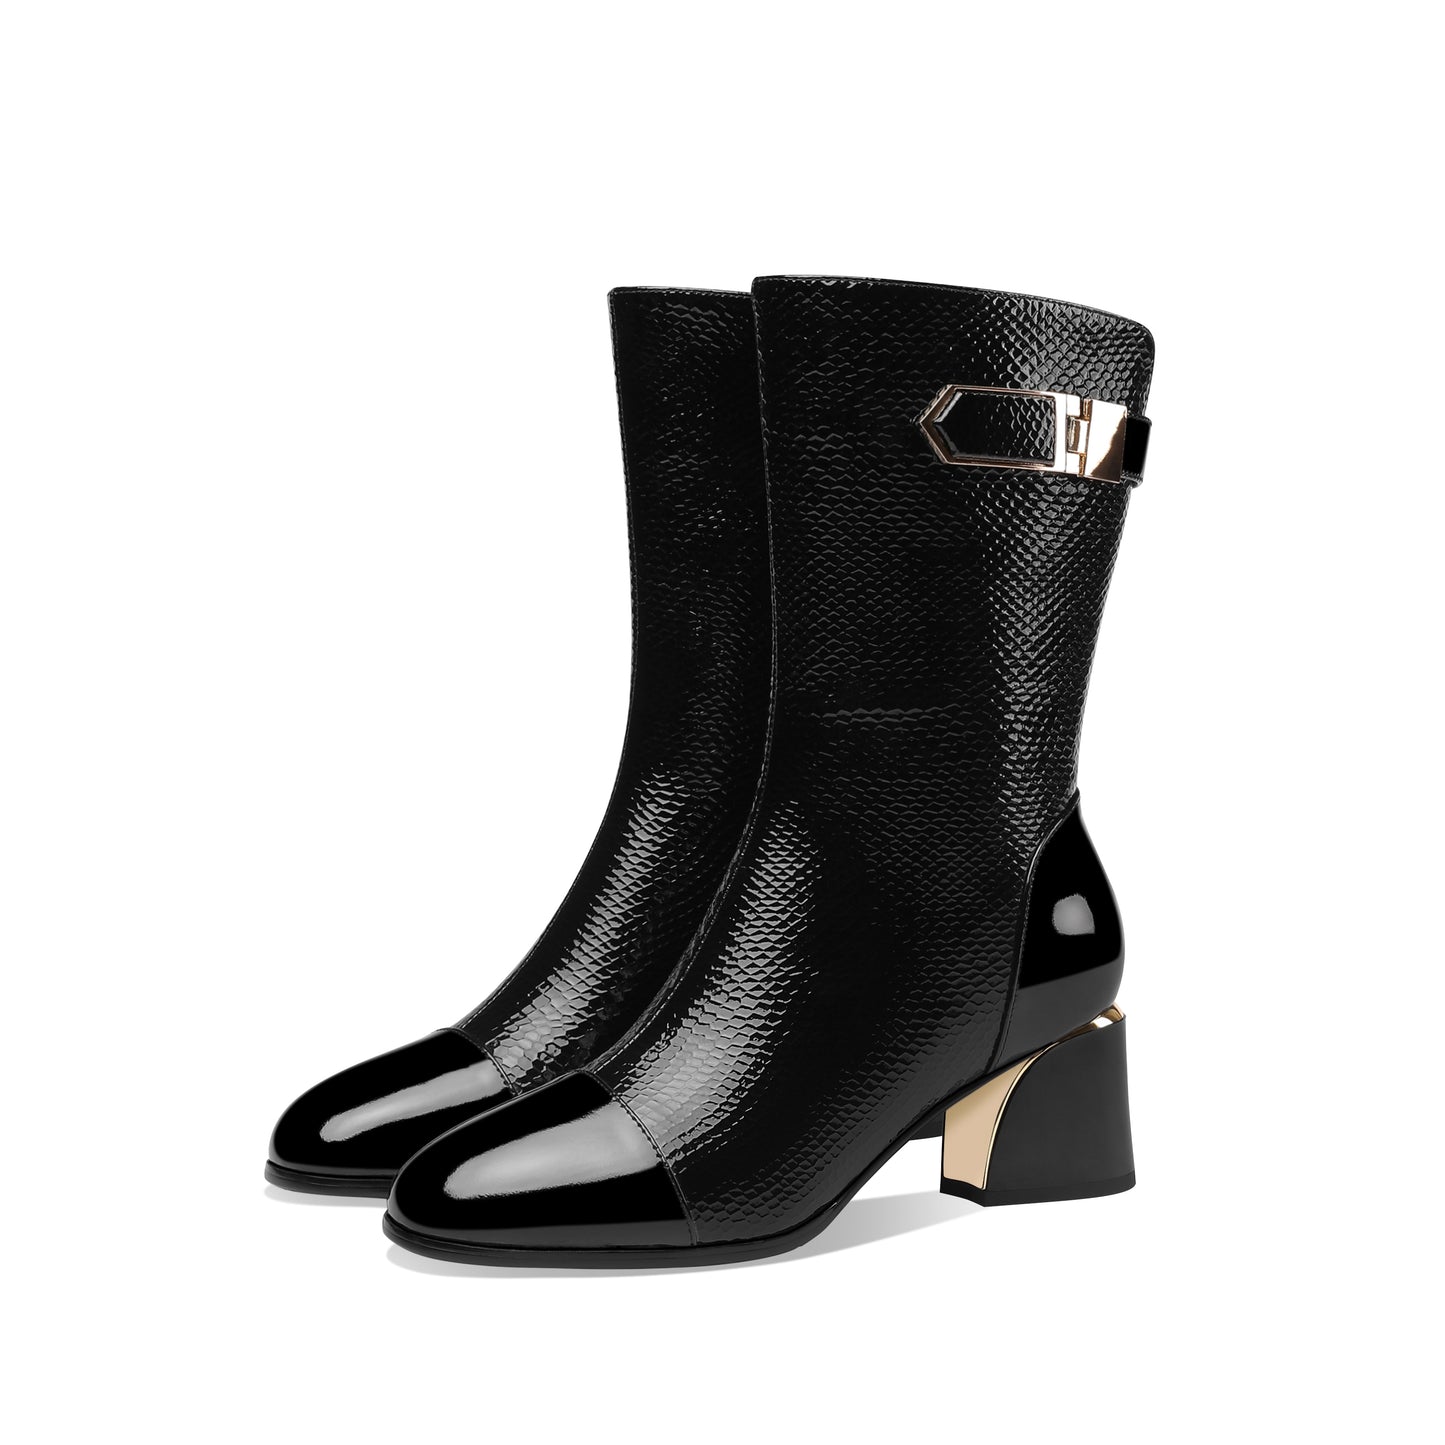 TinaCus Handmade Women's Patent Leather Side Zip Up Block Heel Cap-Toe Black Mid-Calf Boots with Chic Metal Pattern